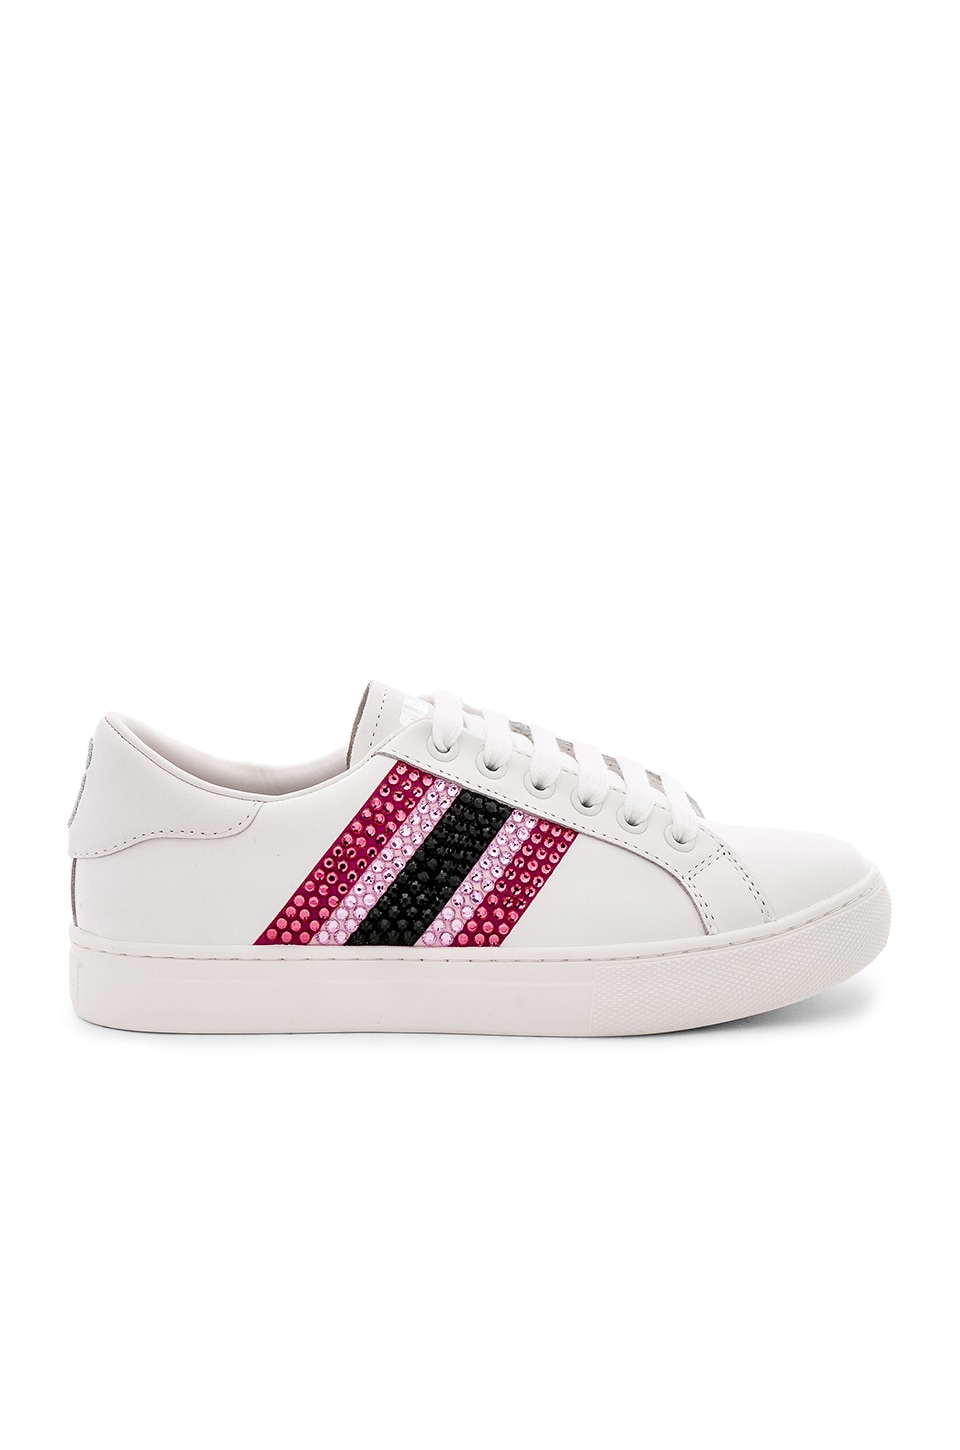 marc jacobs empire strass low top sneaker